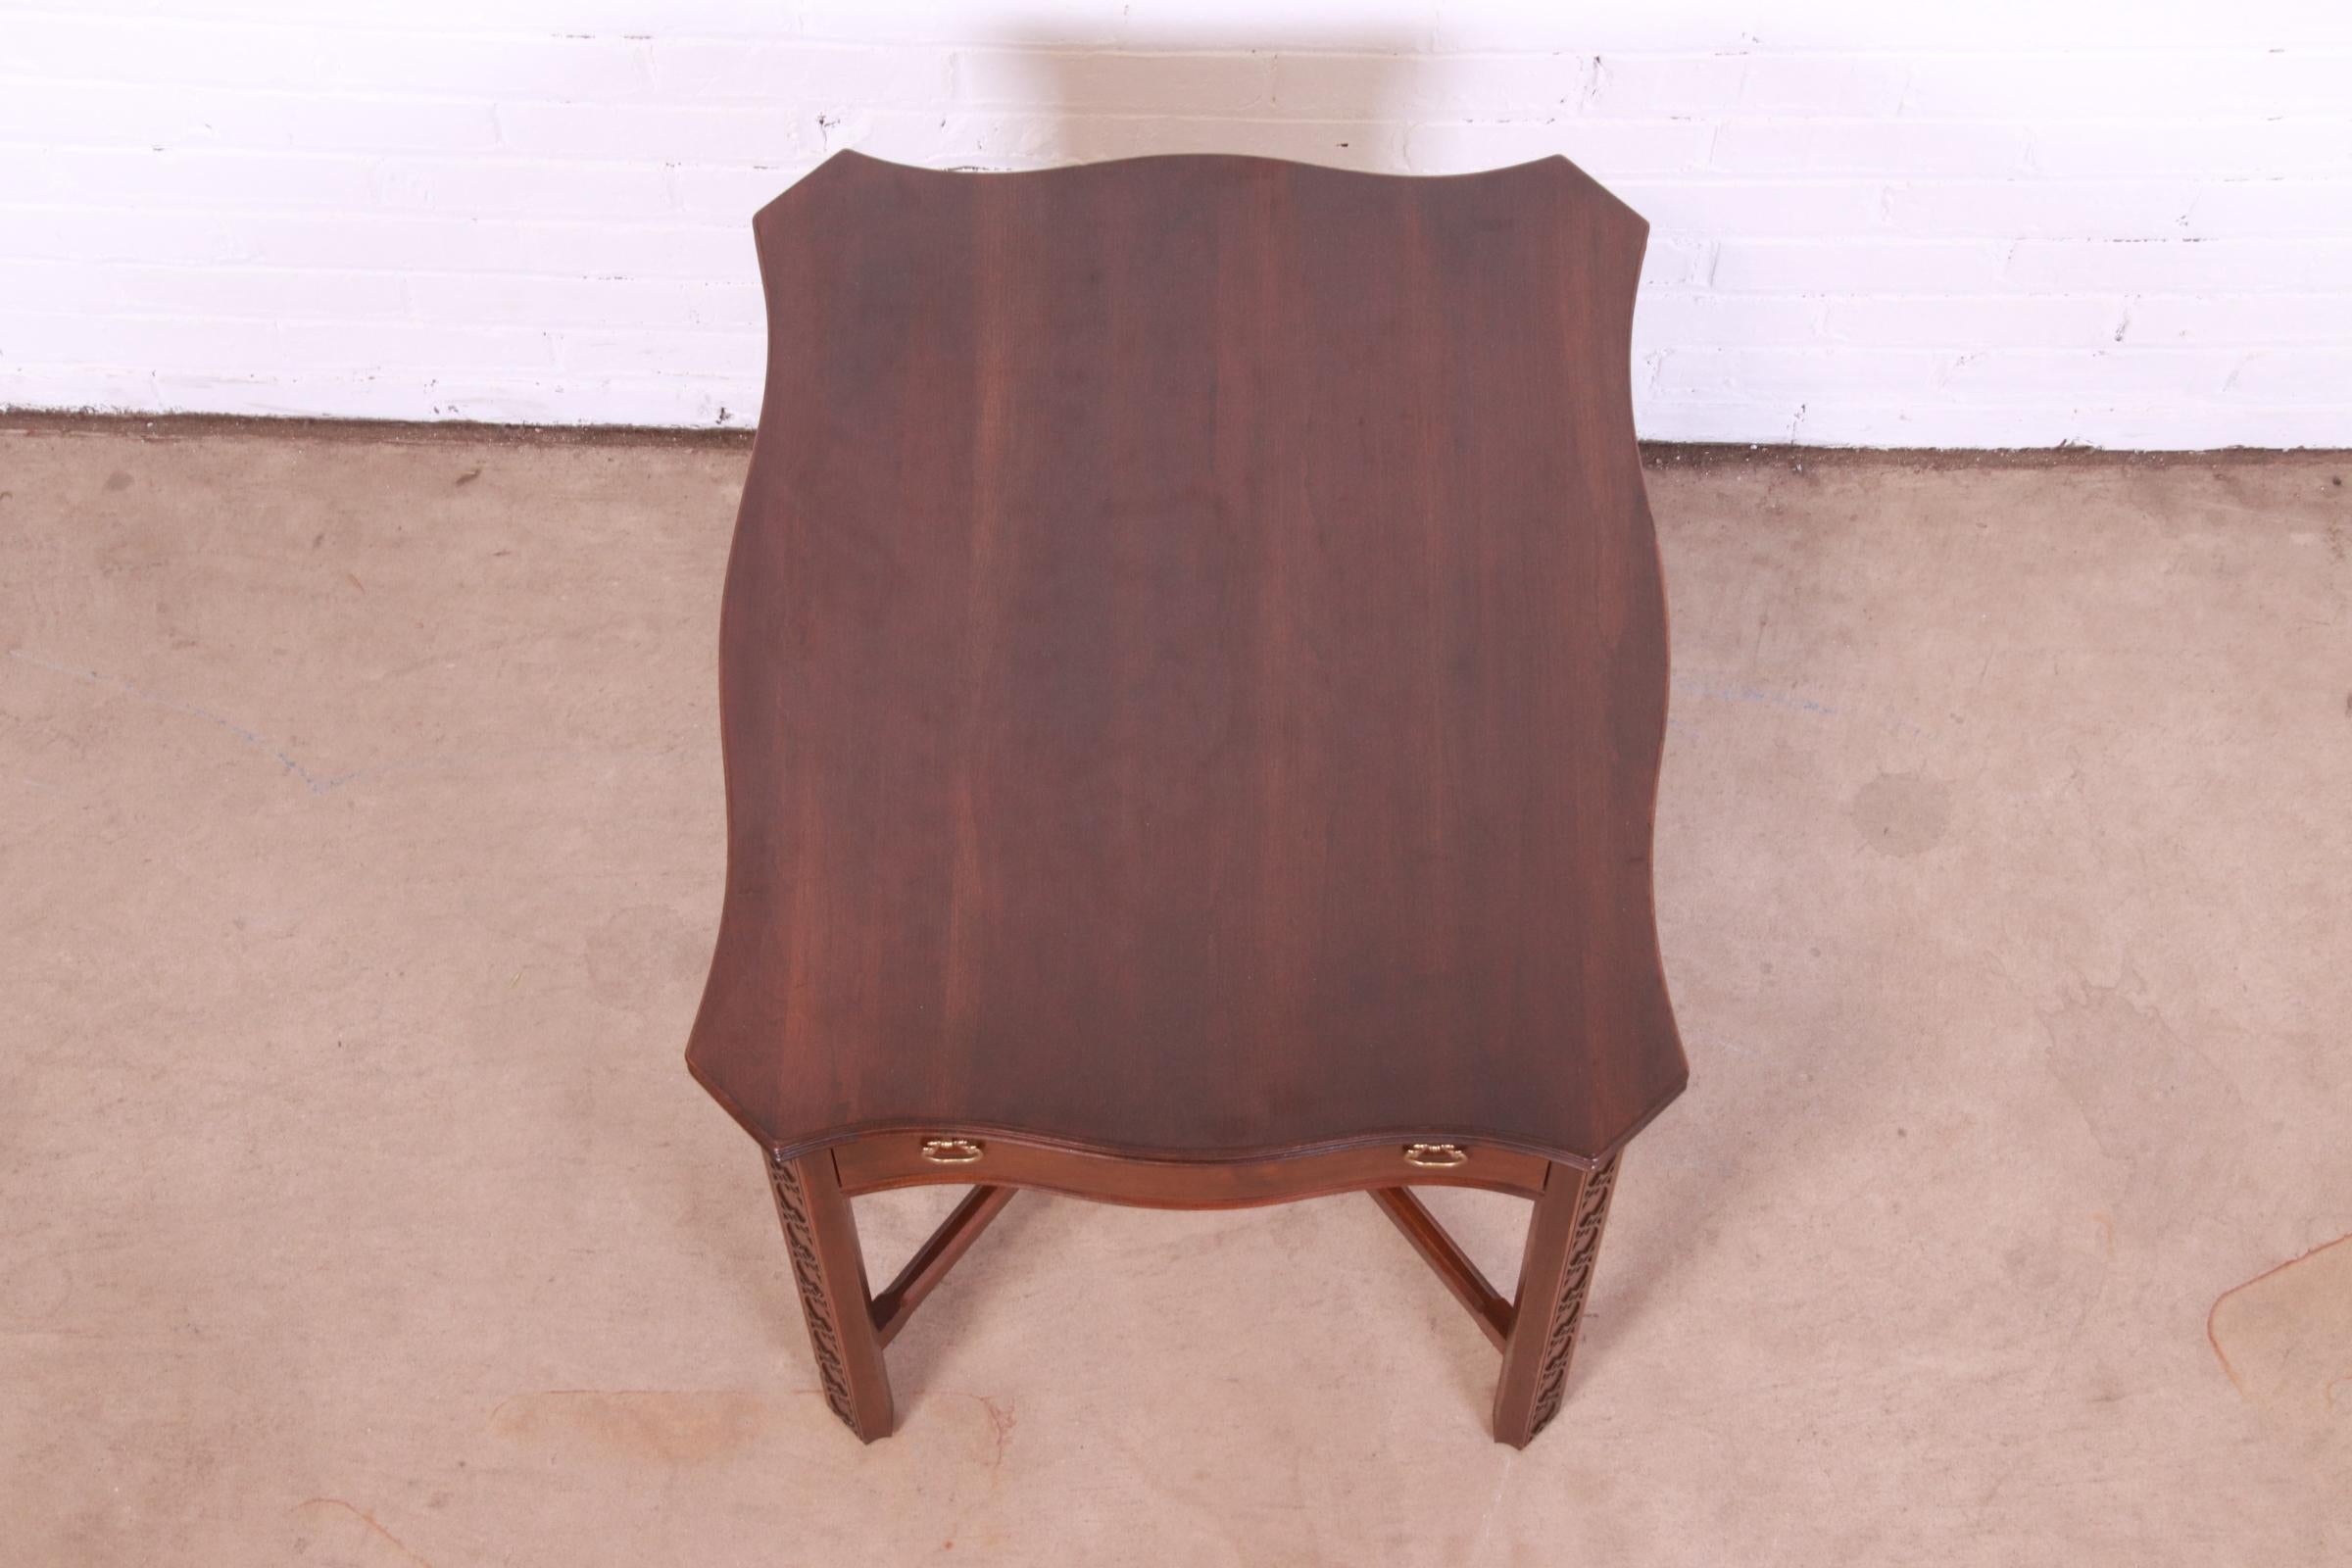 Ethan Allen Georgian Carved Cherry Wood Tea Table or Occasional Side Table 8